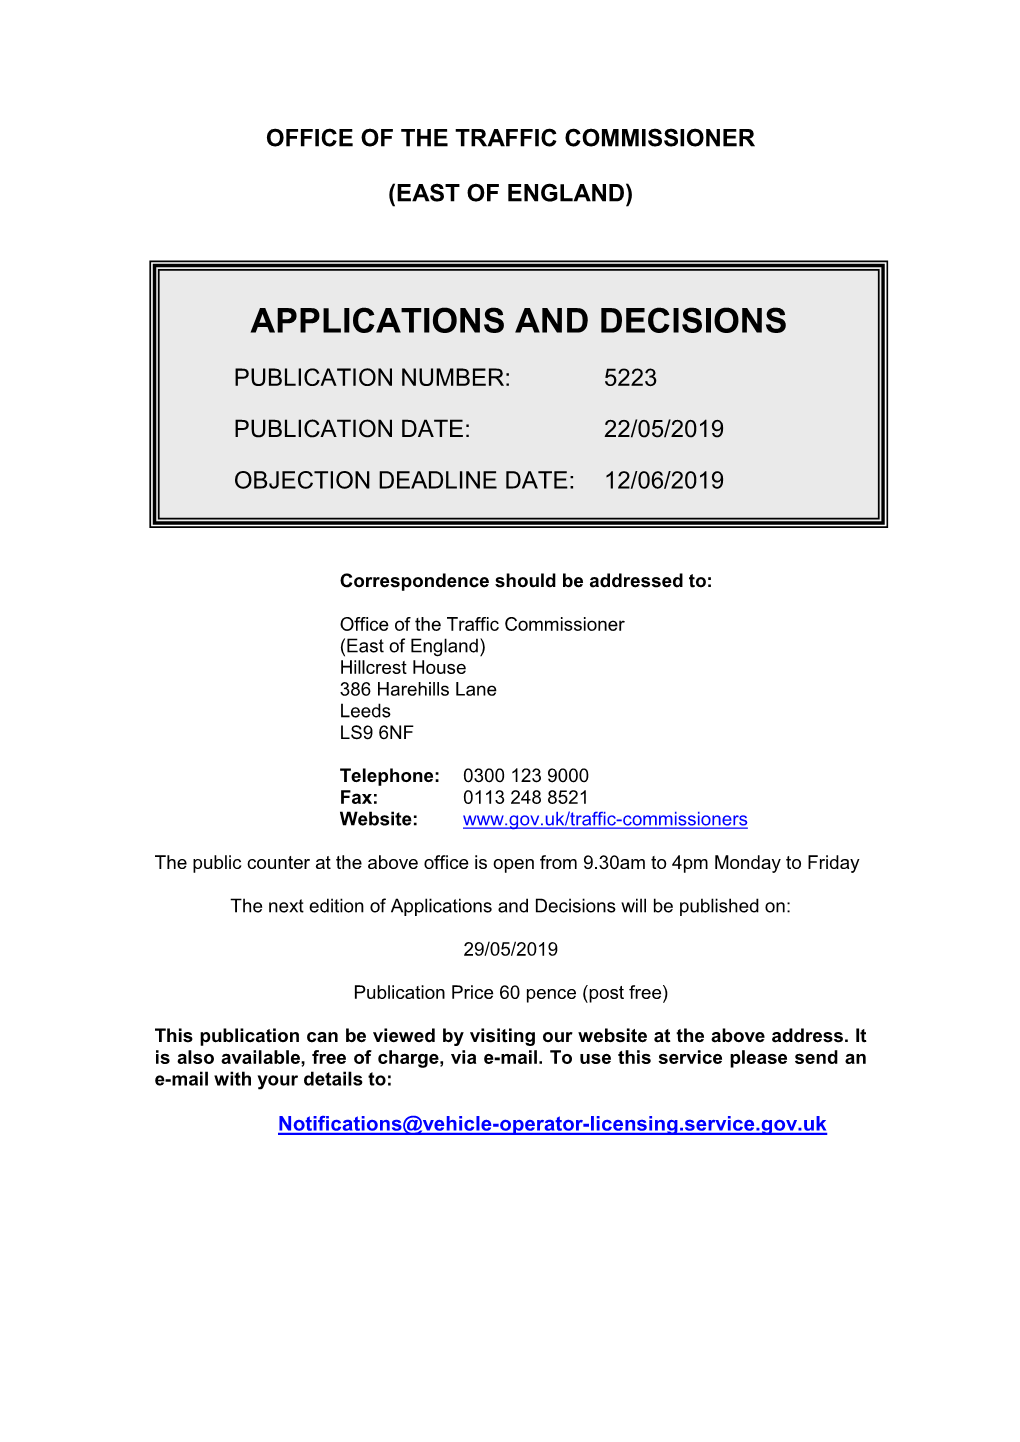 Applications and Decisions for the East of England